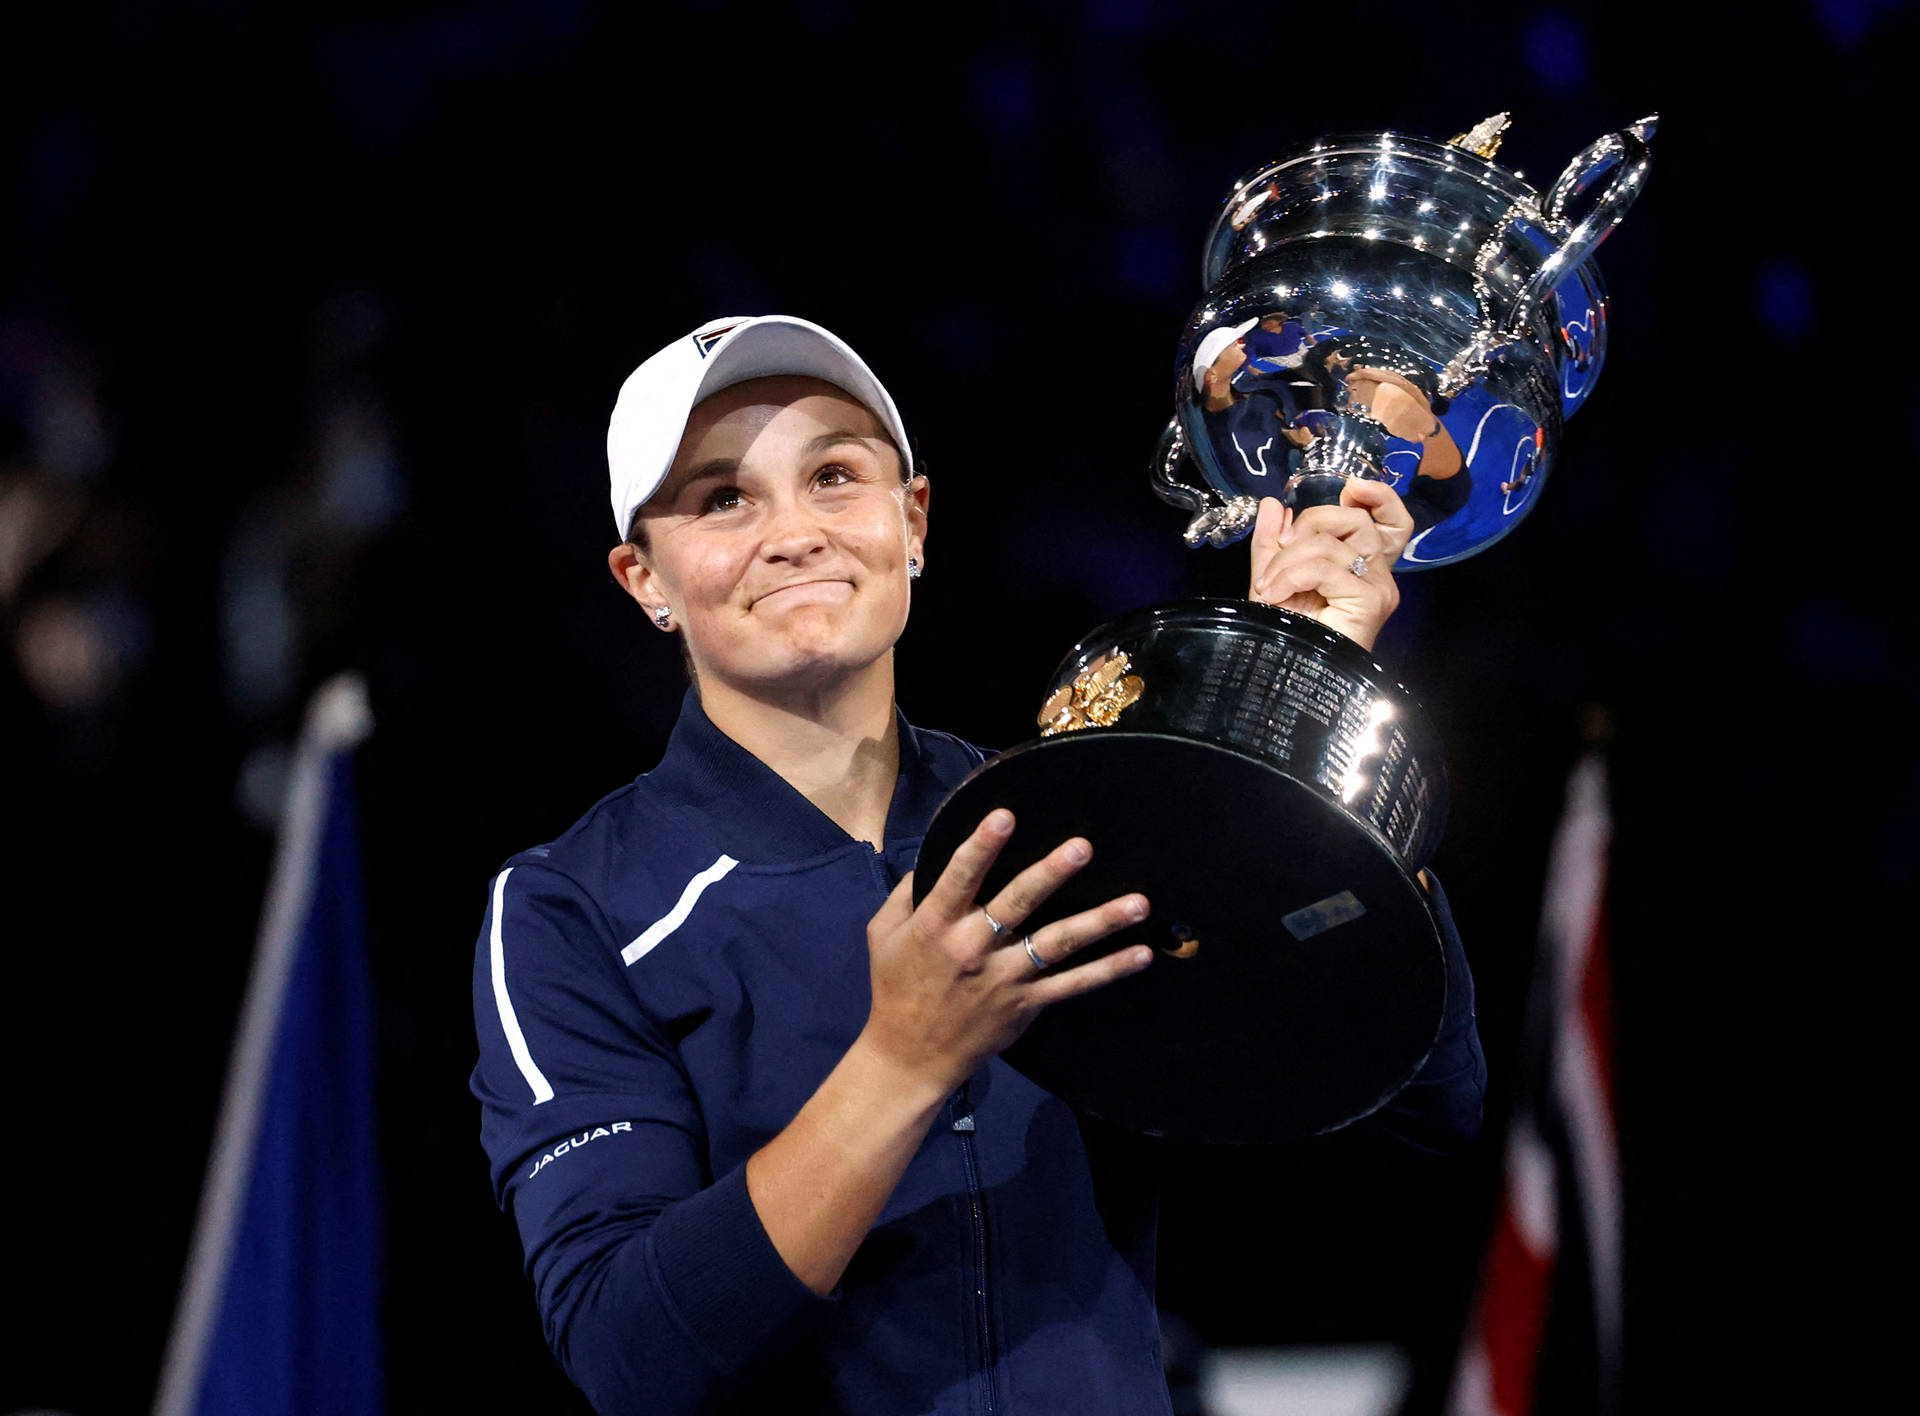 Ashleigh Barty jubilantly holding her trophy Wallpaper